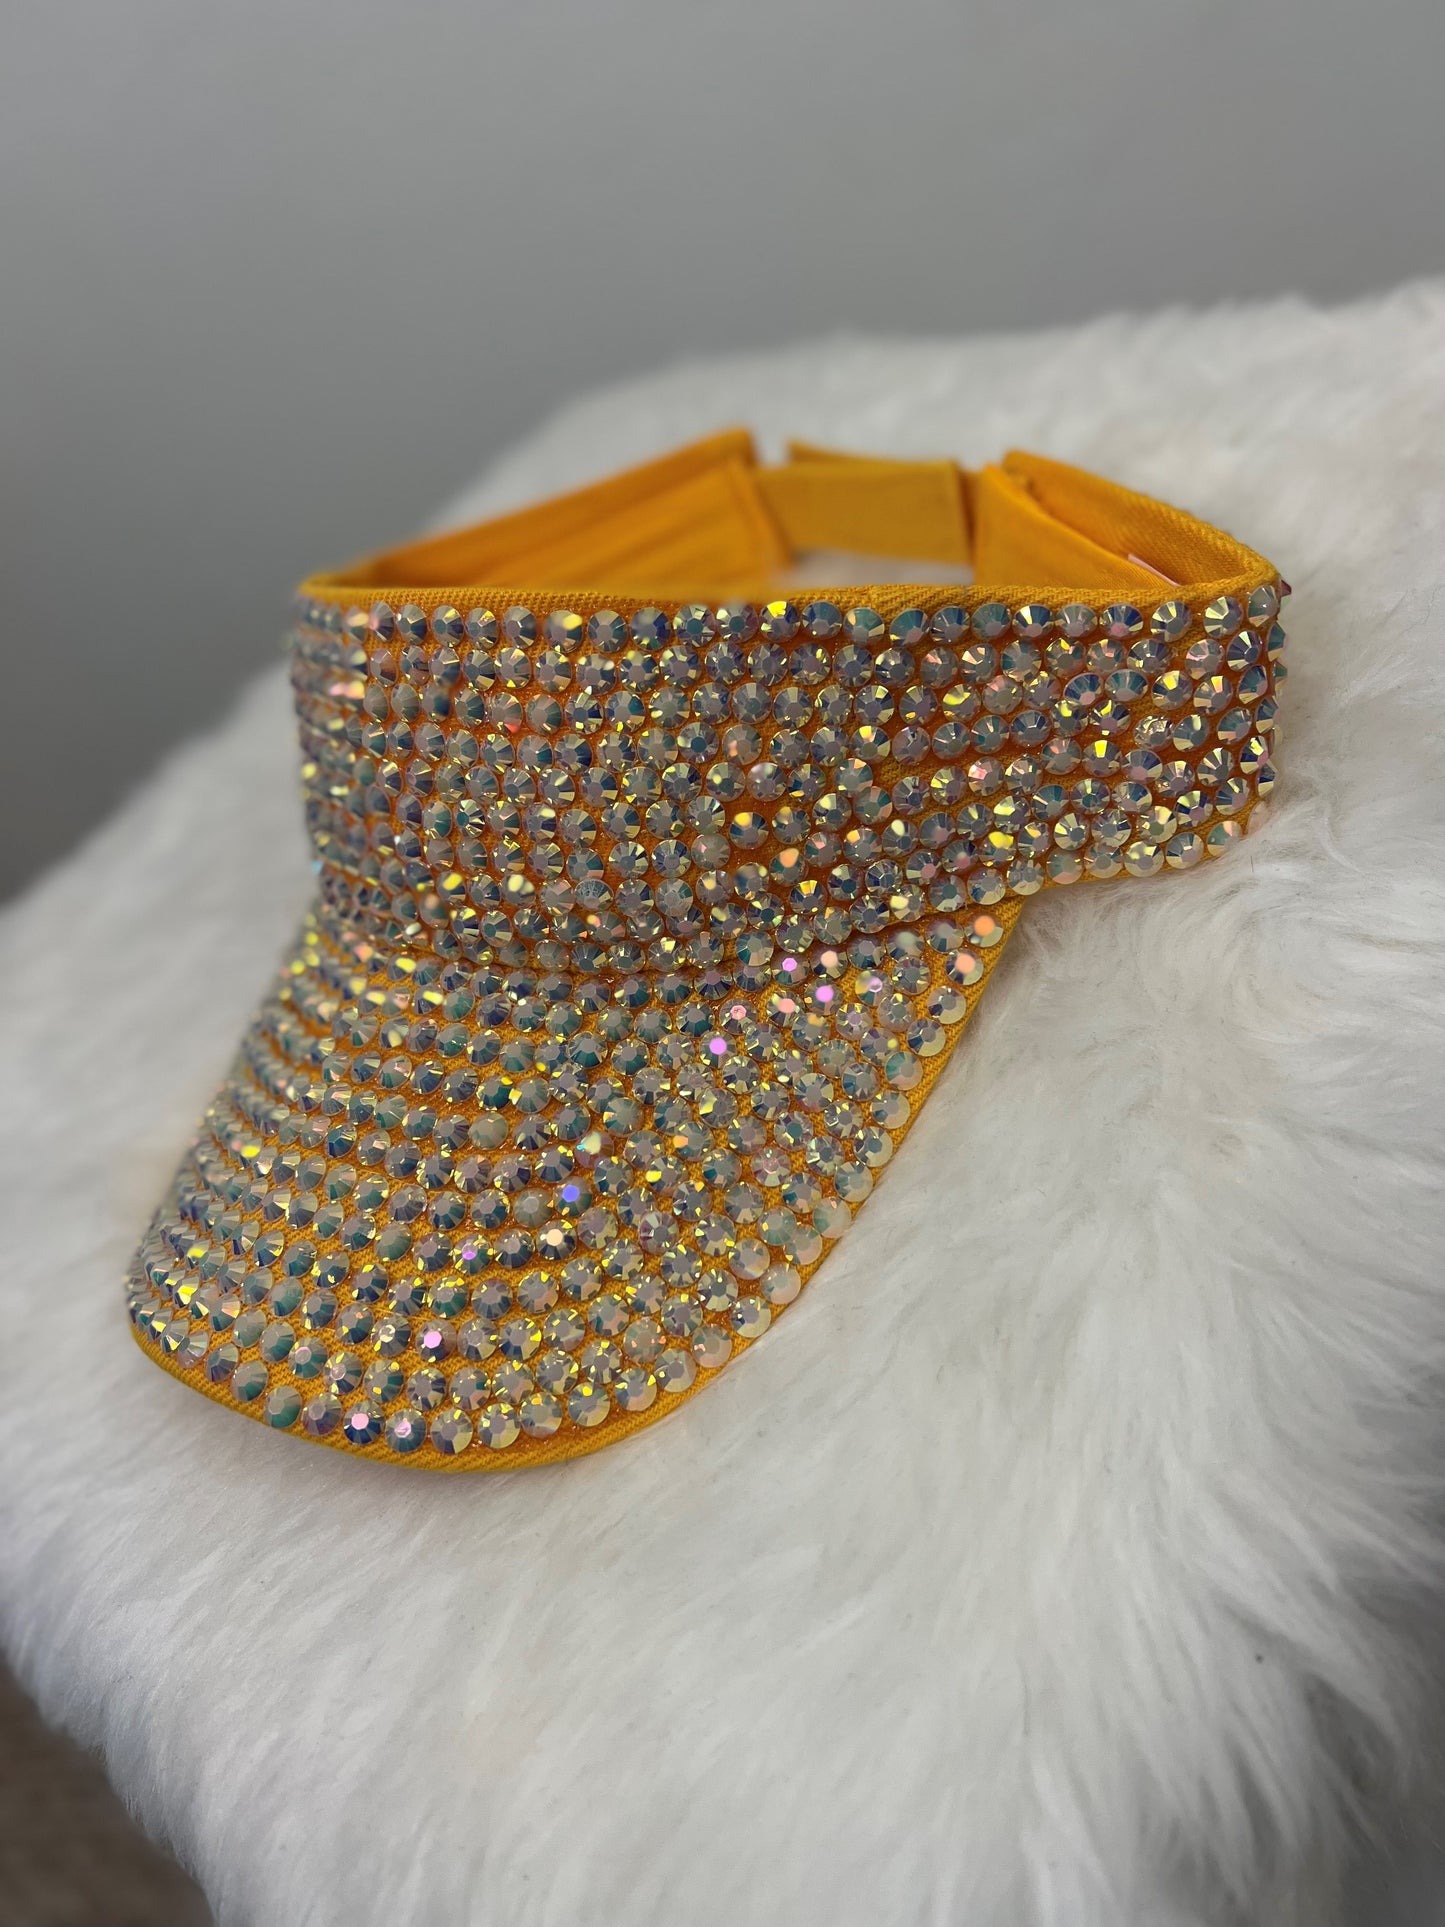 Rhinestone Hat at Pollys Boutique -  Yellow